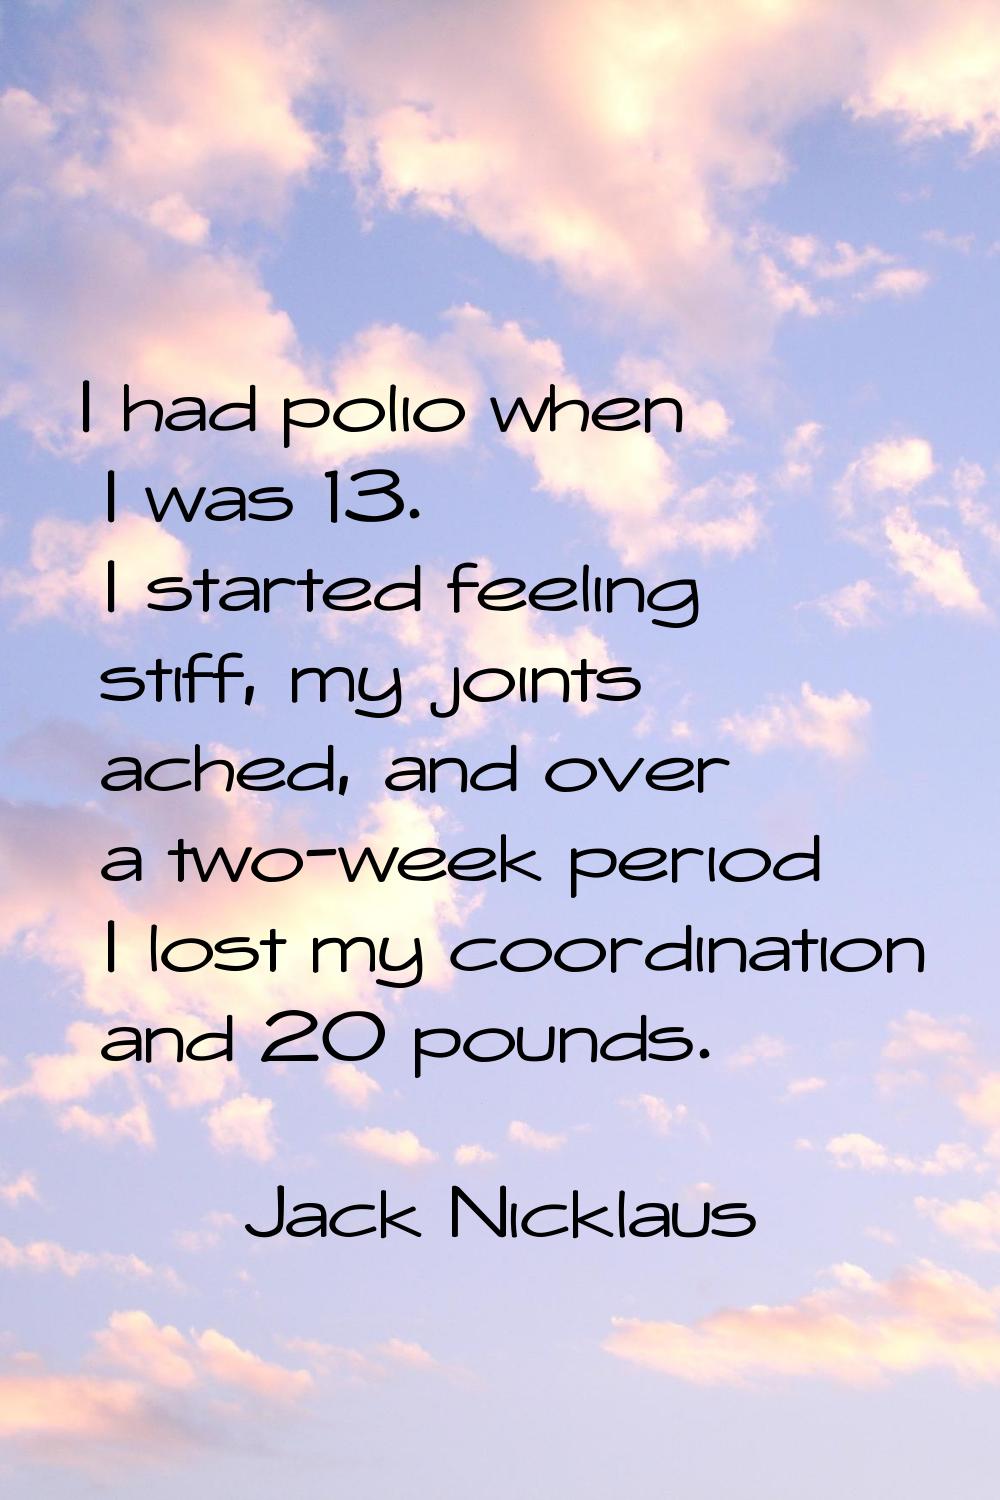 I had polio when I was 13. I started feeling stiff, my joints ached, and over a two-week period I l